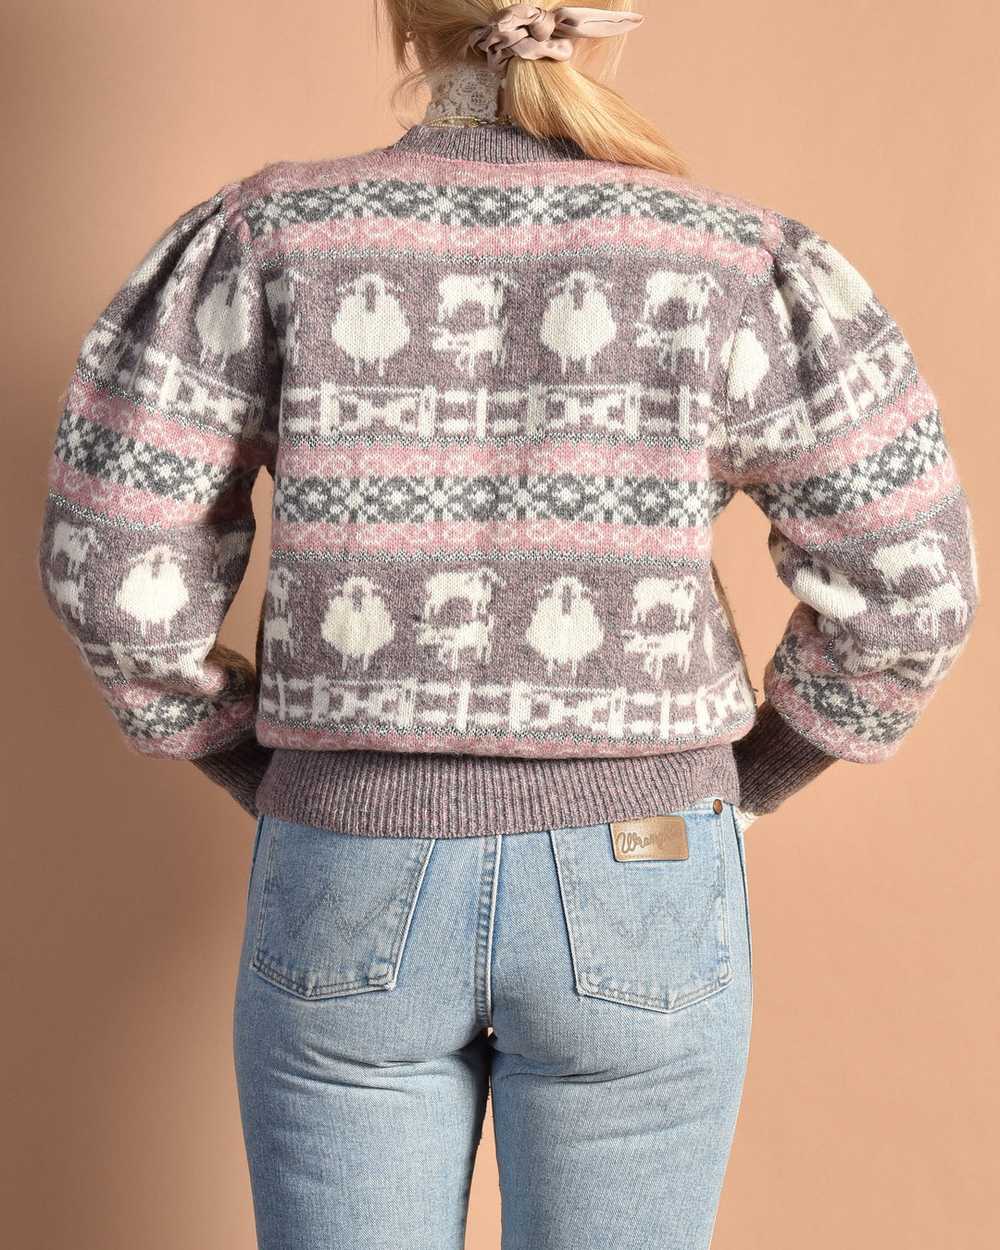 Dorian 1980s Sparkly Wool Sheep Sweater - image 9